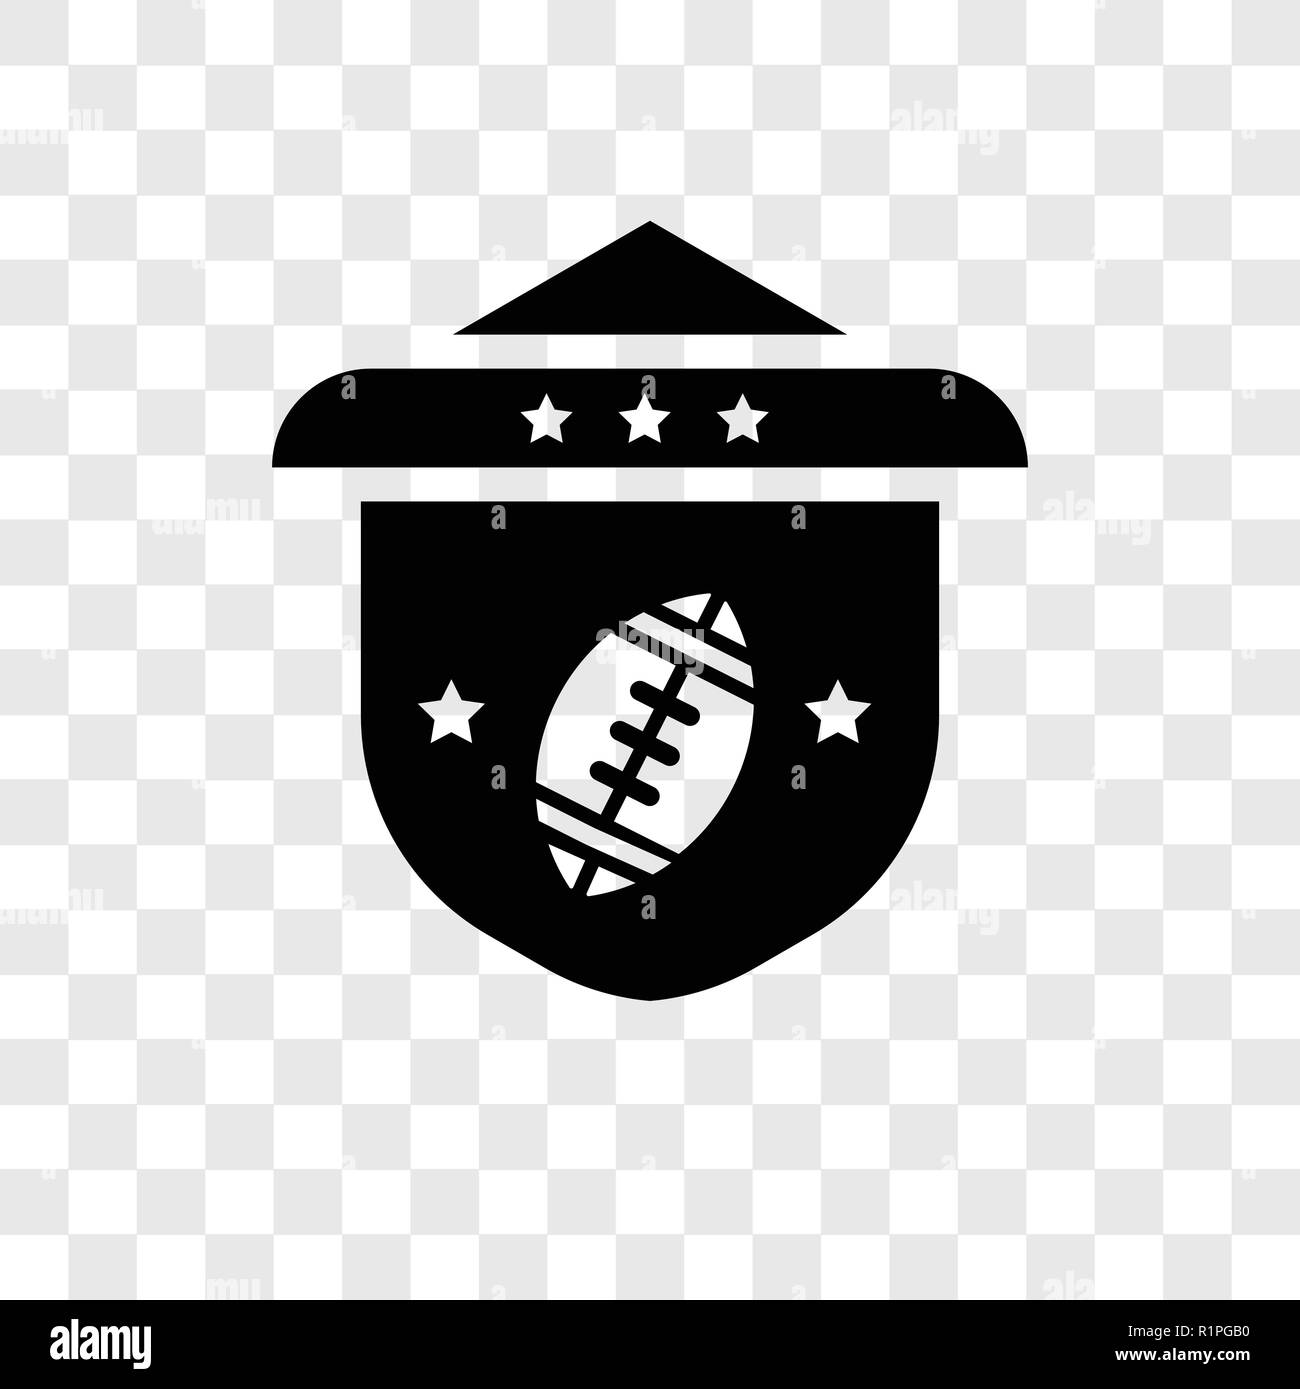 American Football Team Emblem vector icon isolated on transparent background, American Football Team Emblem transparency logo concept Stock Vector